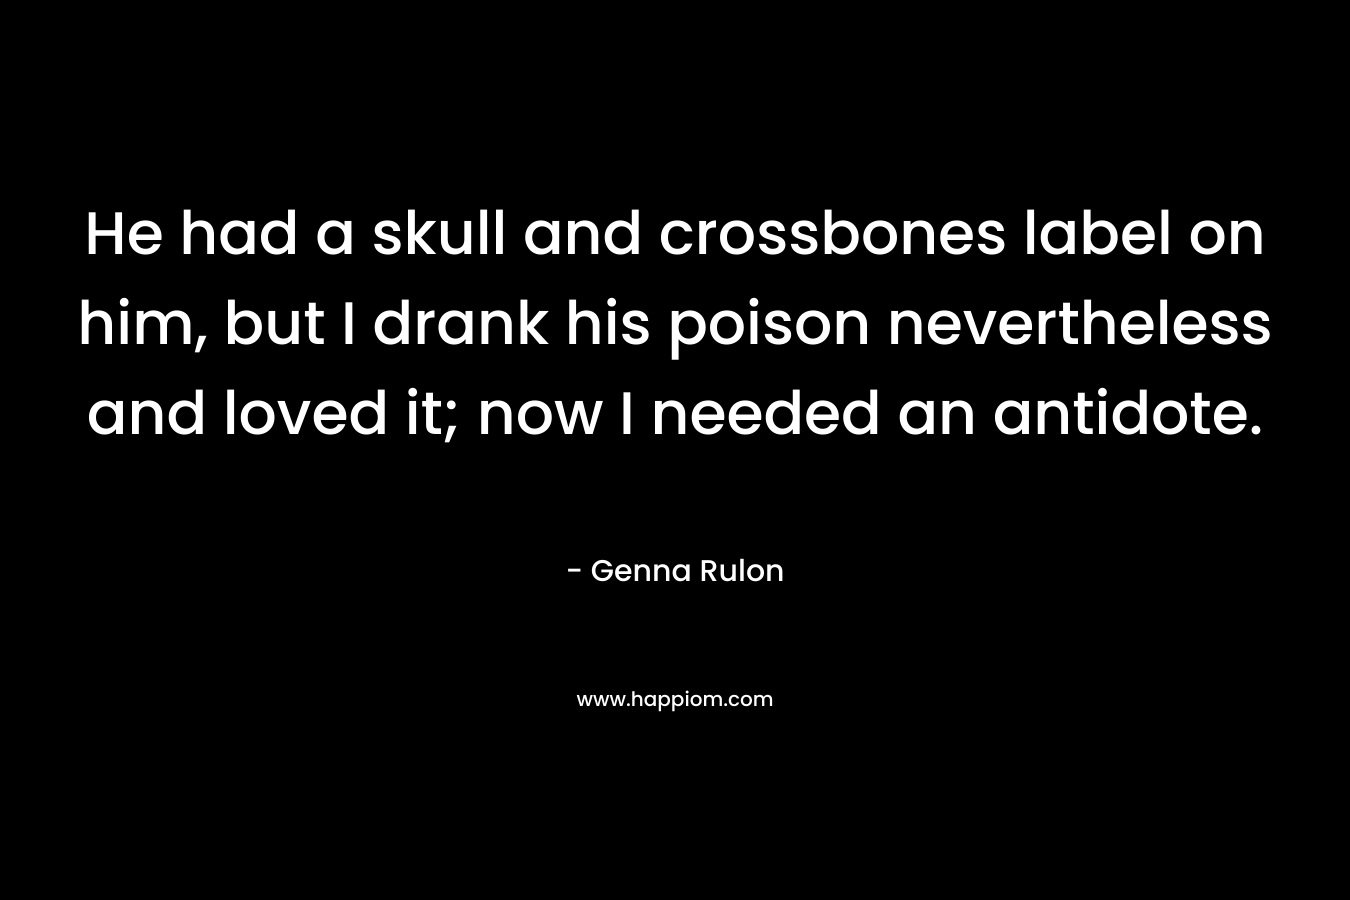 He had a skull and crossbones label on him, but I drank his poison nevertheless and loved it; now I needed an antidote.